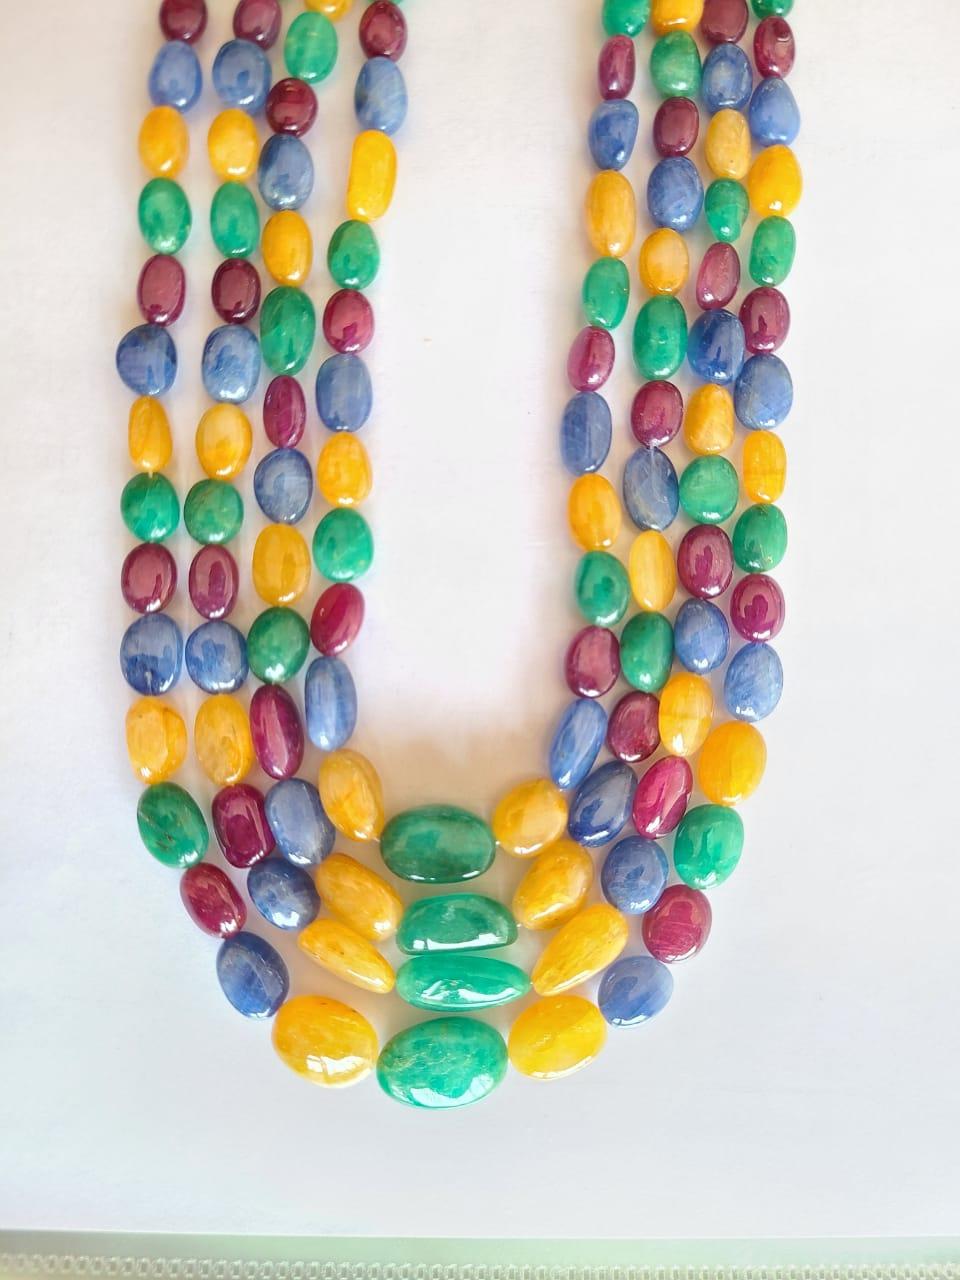 A one of its kind multi strand beaded necklace made using natural Blue Sapphires, Emeralds, Rubies & Yellow Sapphires. The Blue Sapphires & Yellow Sapphires originate from Burma and are completely natural without any treatment. The Emeralds are also